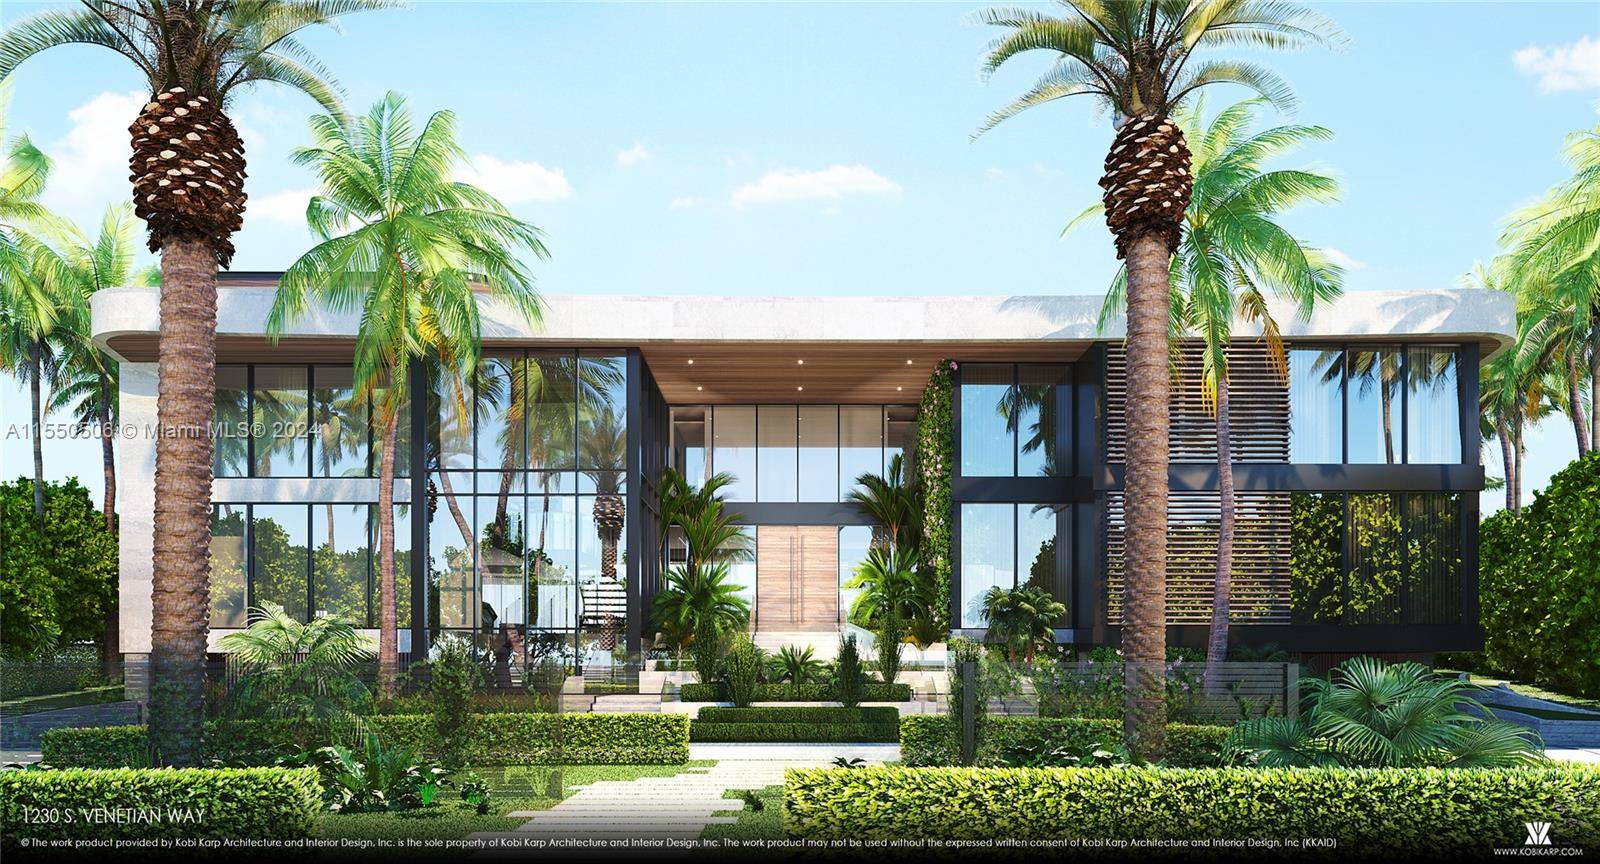 Build the estate of your dreams on this prestigious waterfront property and spanning approximately 27, 000 square feet with 208 ft of waterfrontage.